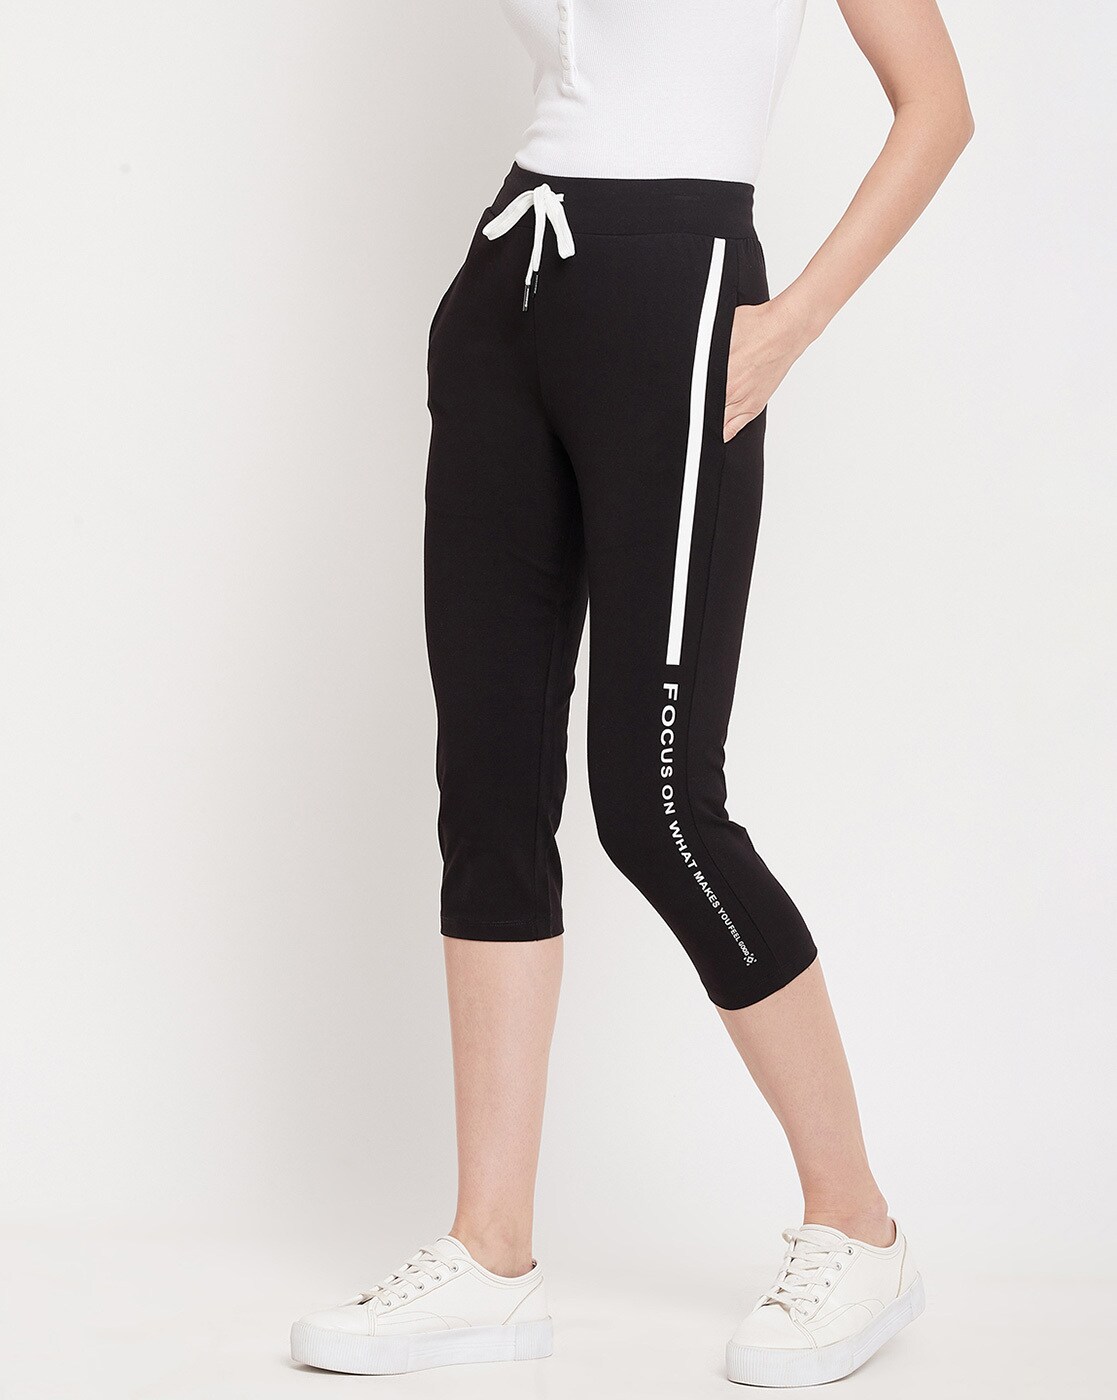 Buy Stylish 3xl Jeggings Collection At Best Prices Online